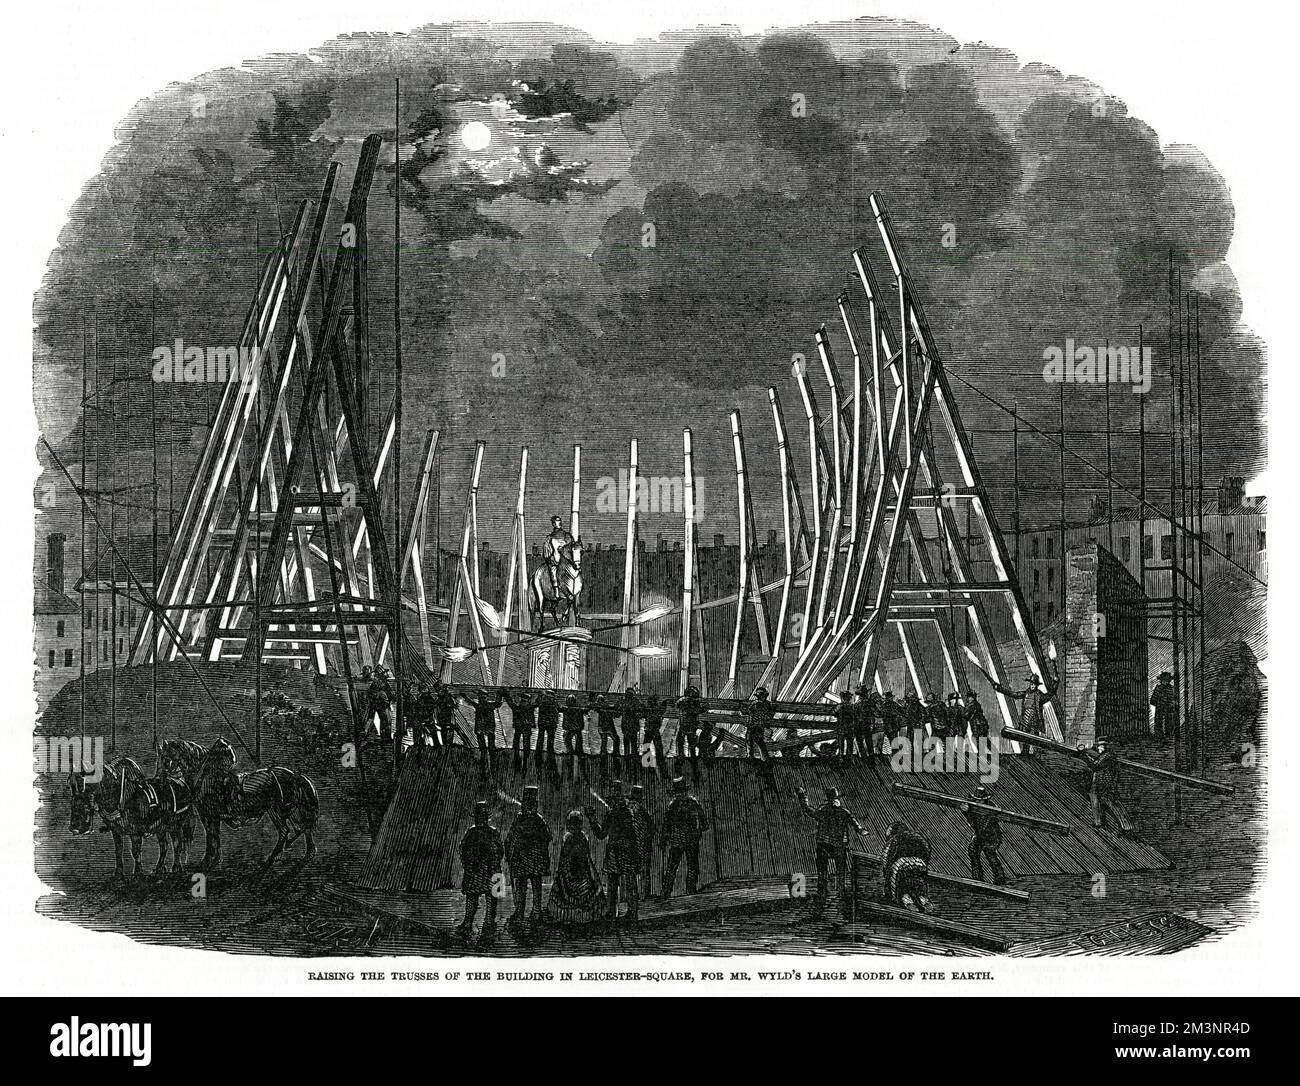 Raising of the Trusses in Leicester Square, London, for George Wylds large model of the Earth and surface. 100 workmen busily moving timber support of the capacious structure.      Date: 1851 Stock Photo